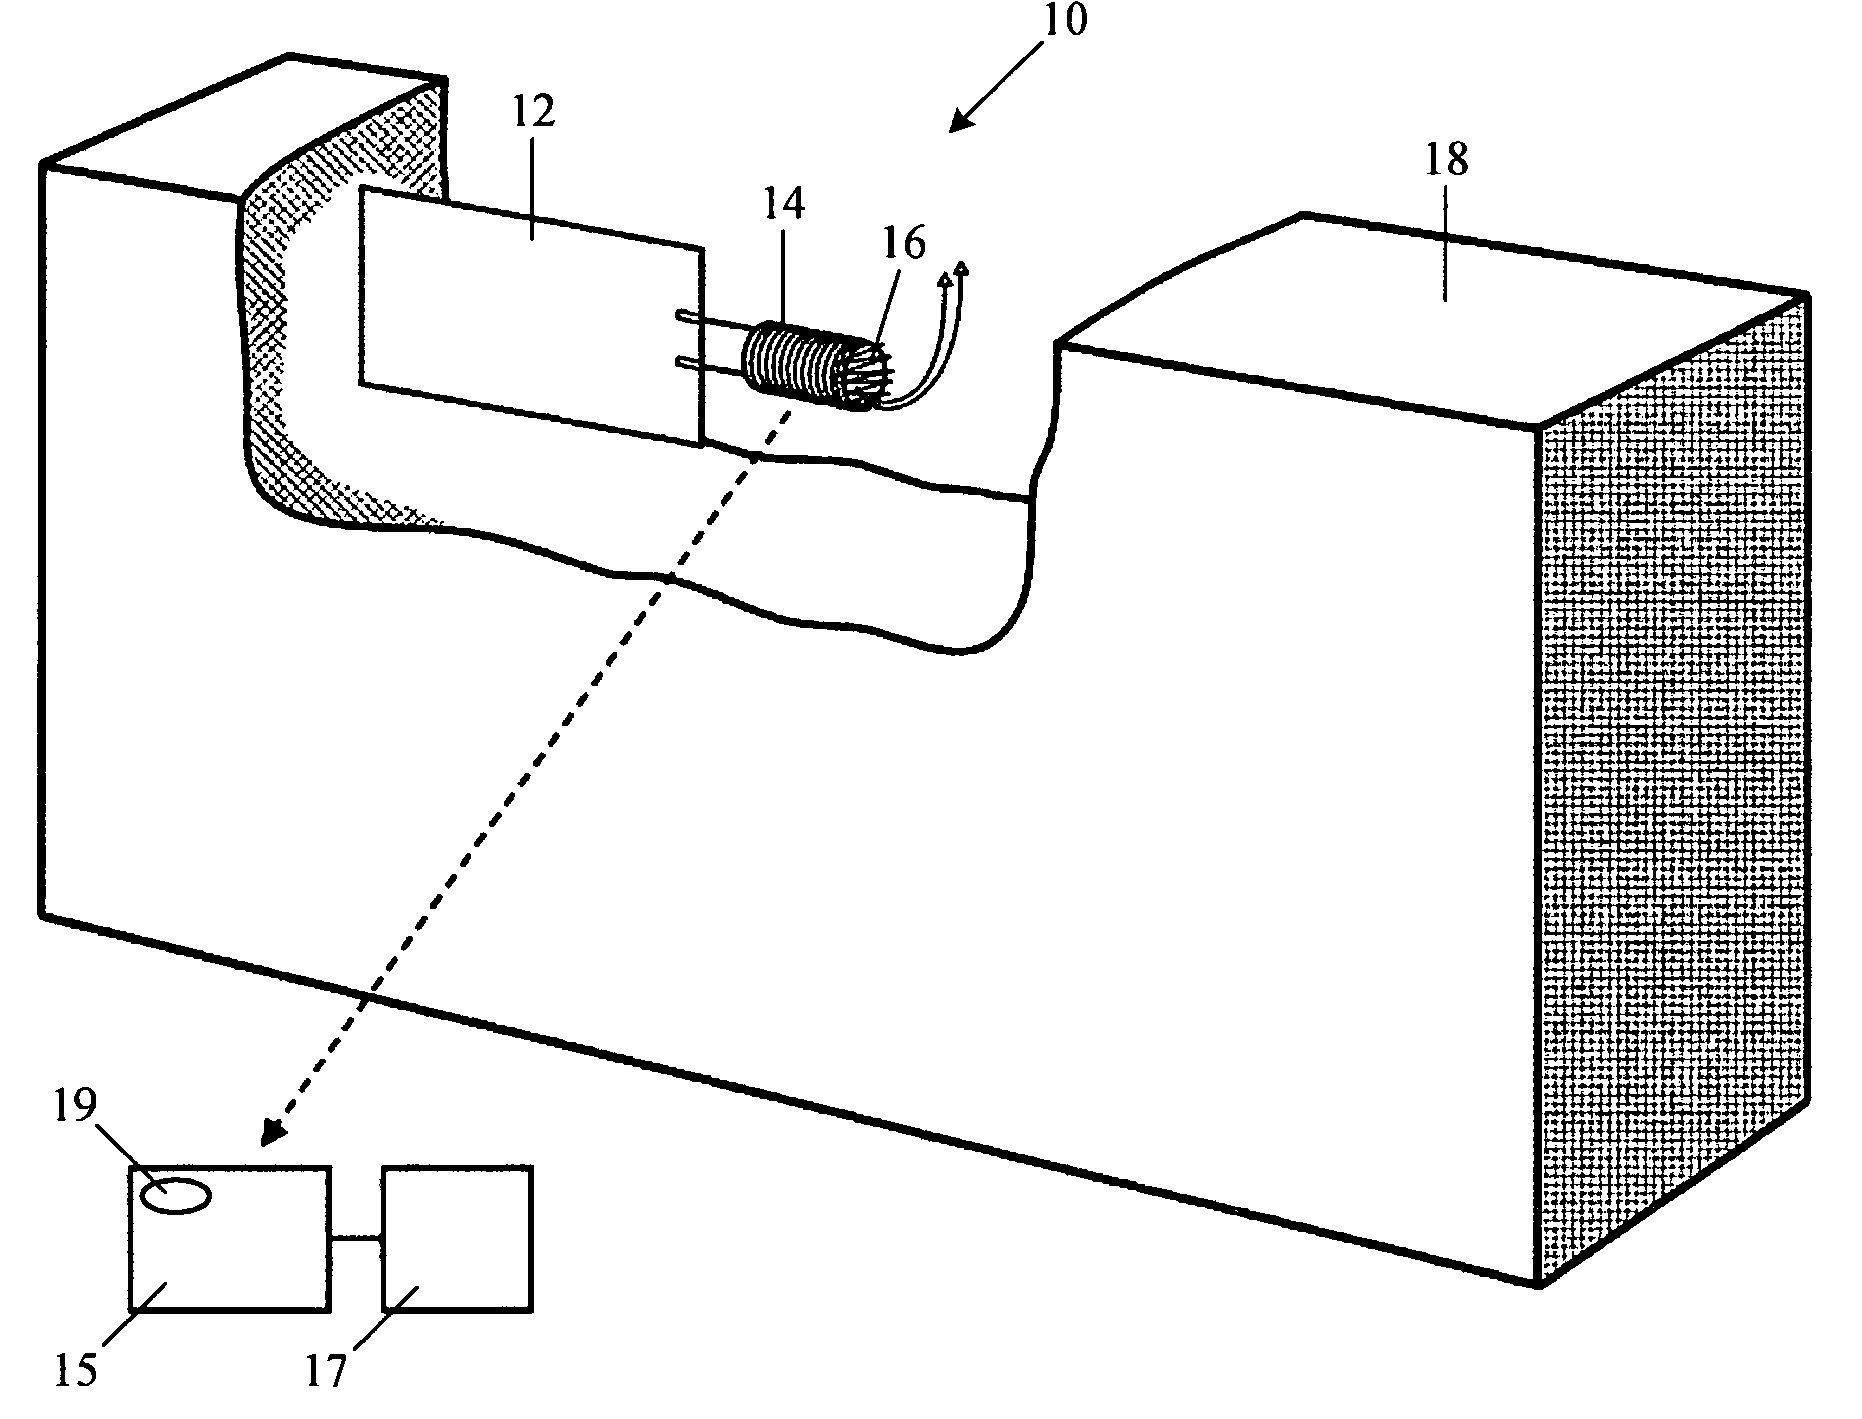 Method and apparatus for monitoring conveyor belts